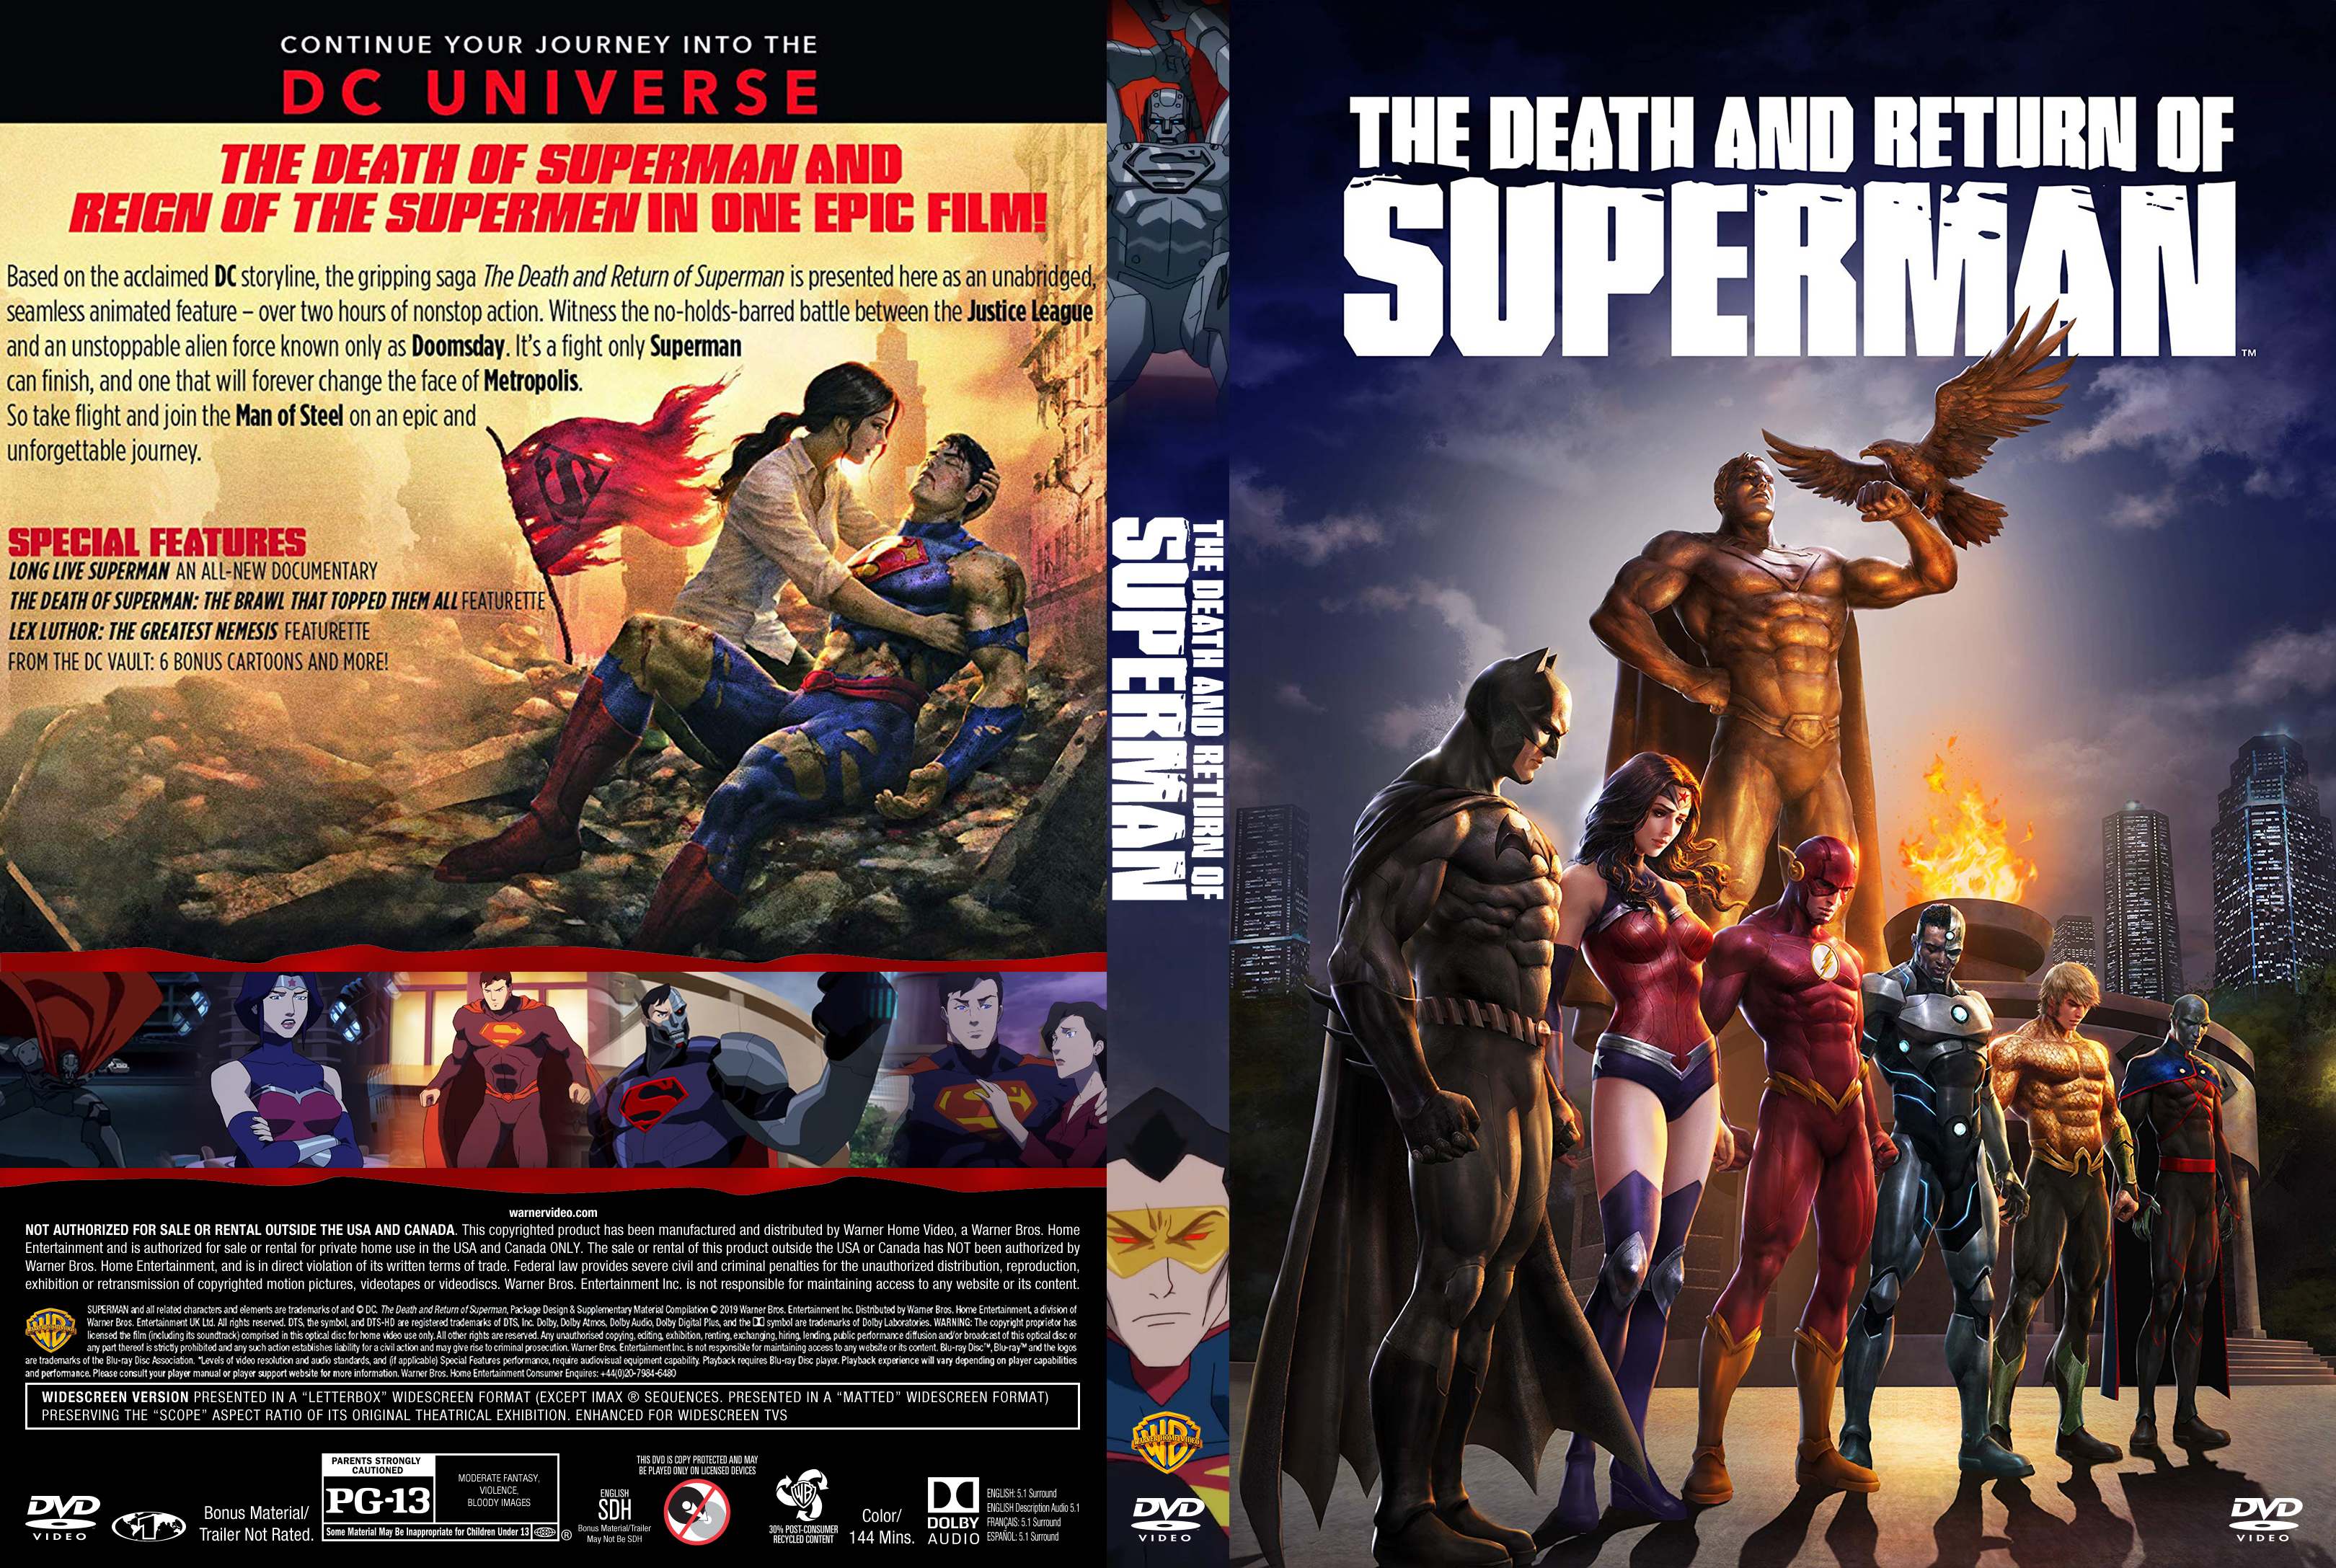 The dead return. The Death and Return of Superman. The Death and Return of Superman 2019. Death and Return of Superman Sega. The Death of Superman poster.